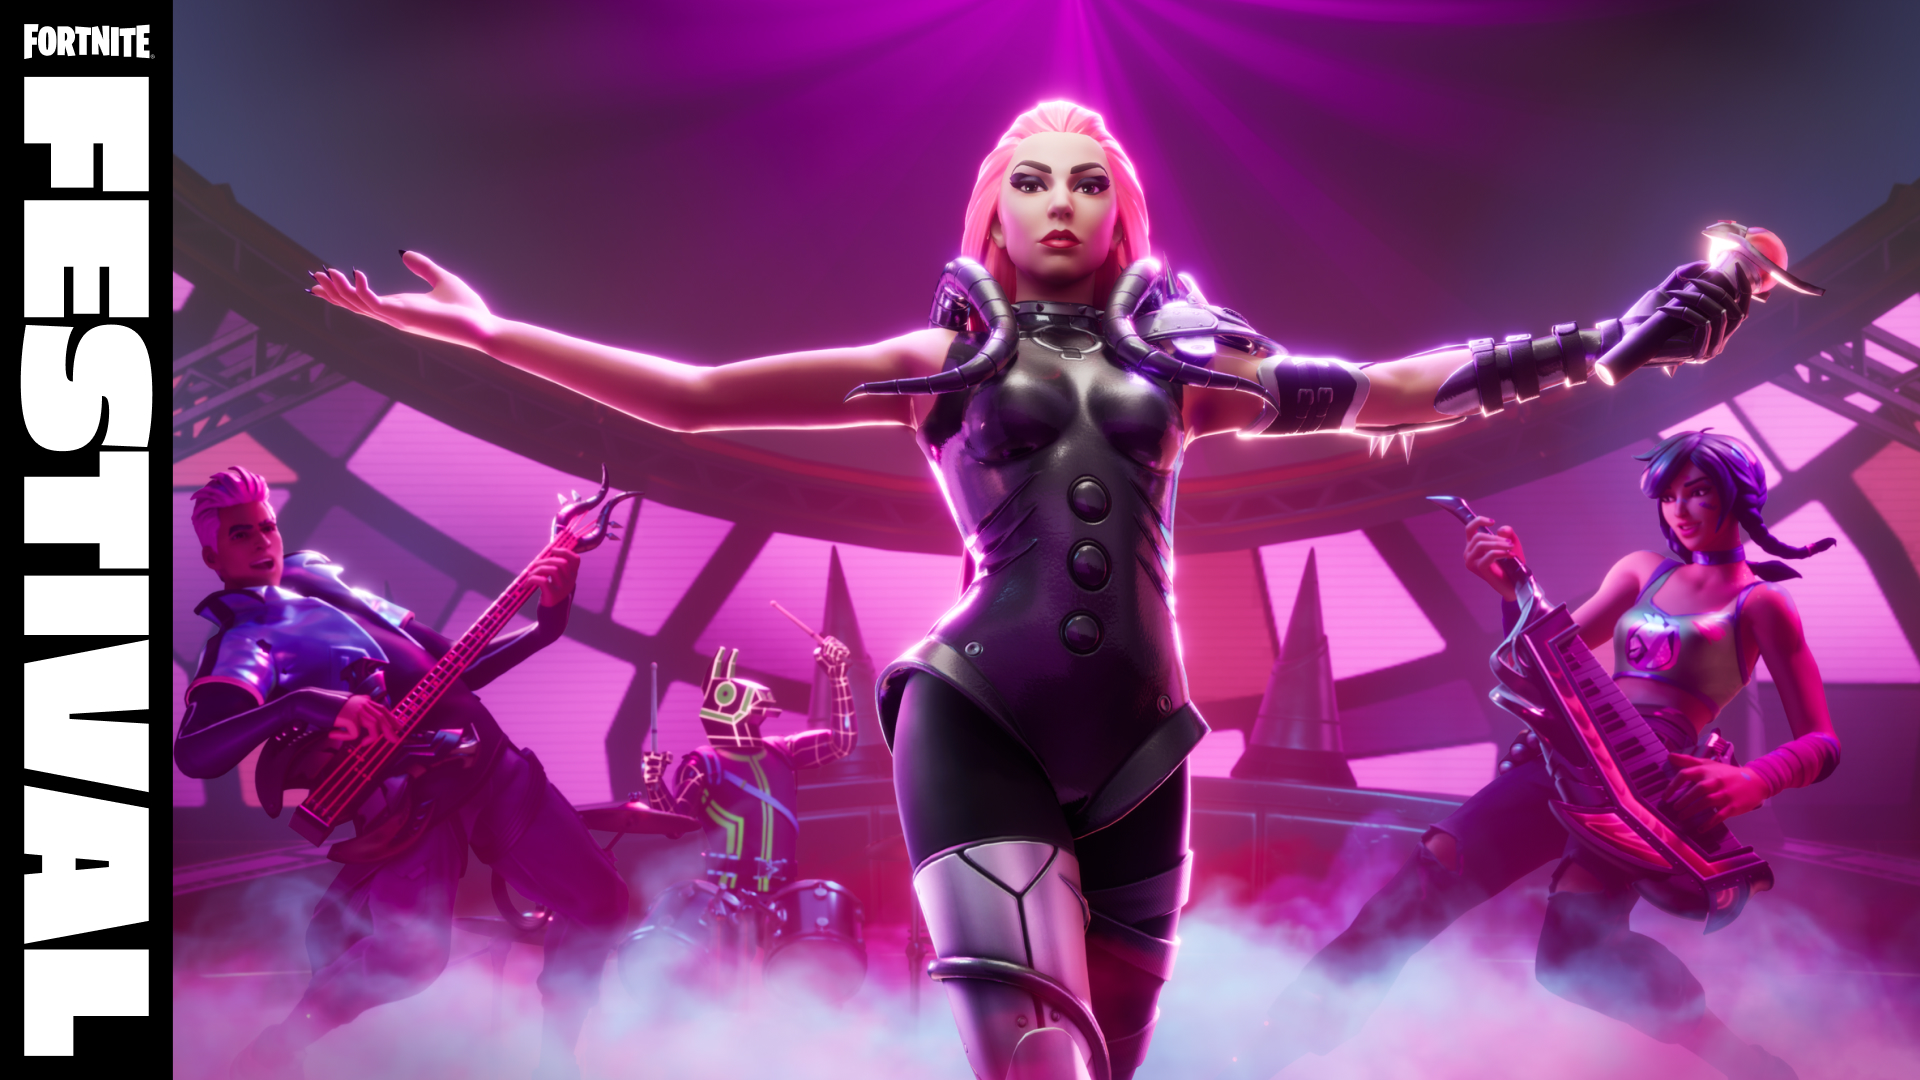 Lady Gaga Joins the Fortnite Icon Series